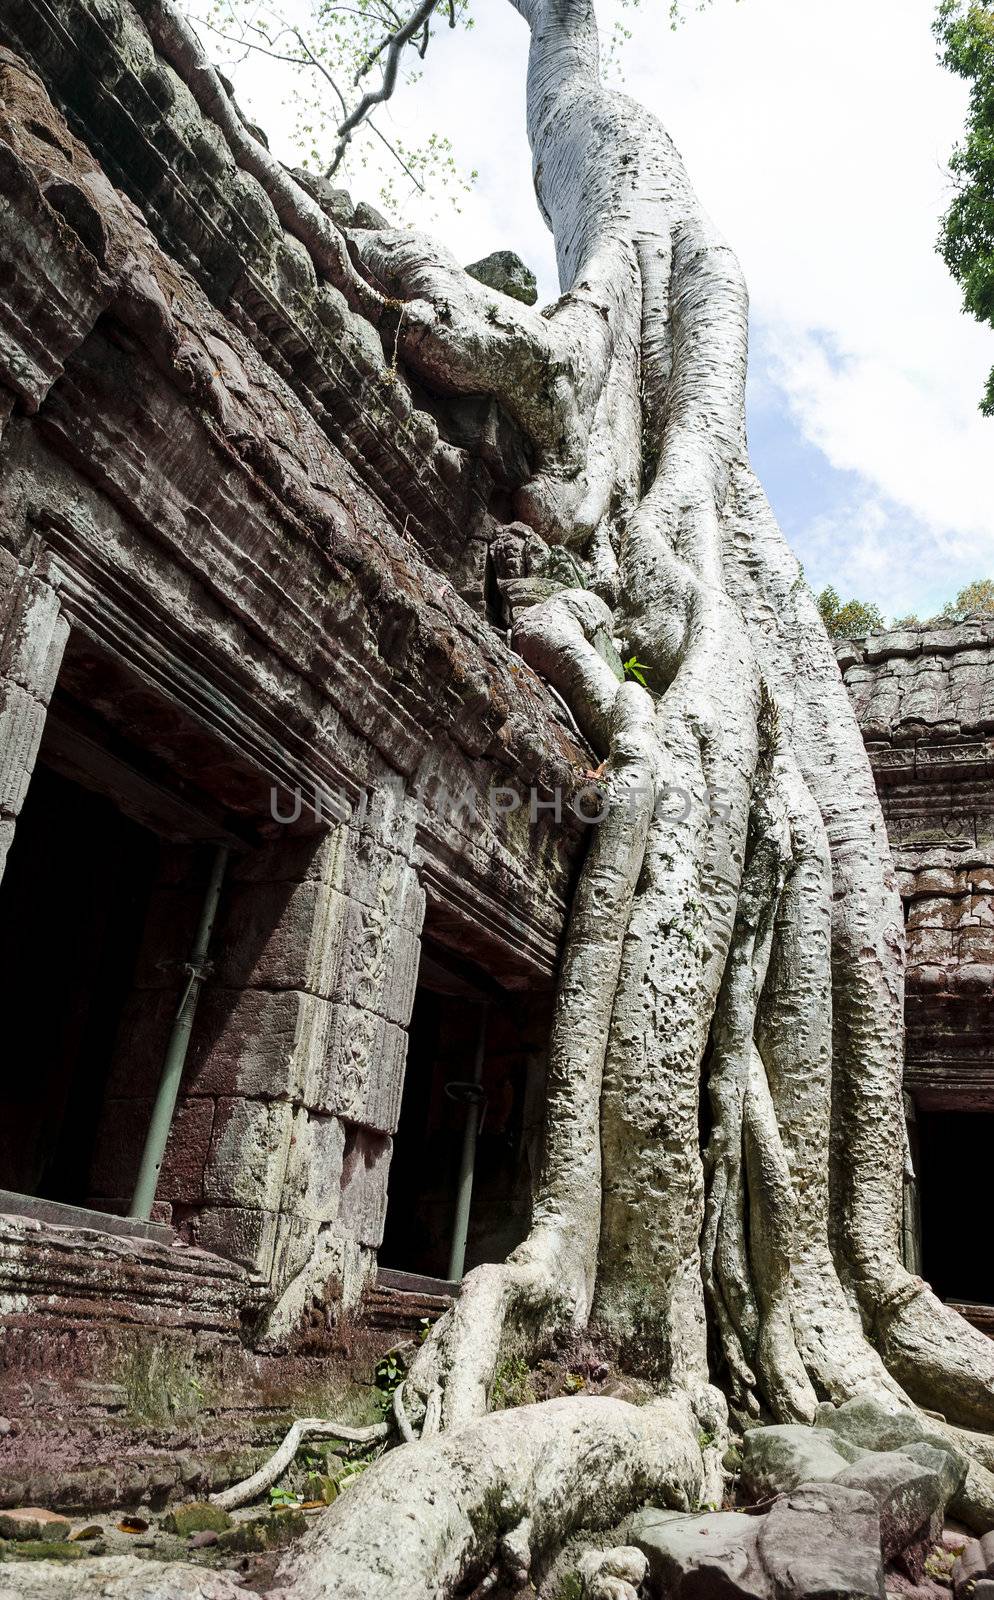 The ancient ta phrom made famous by the trees and tomb raider